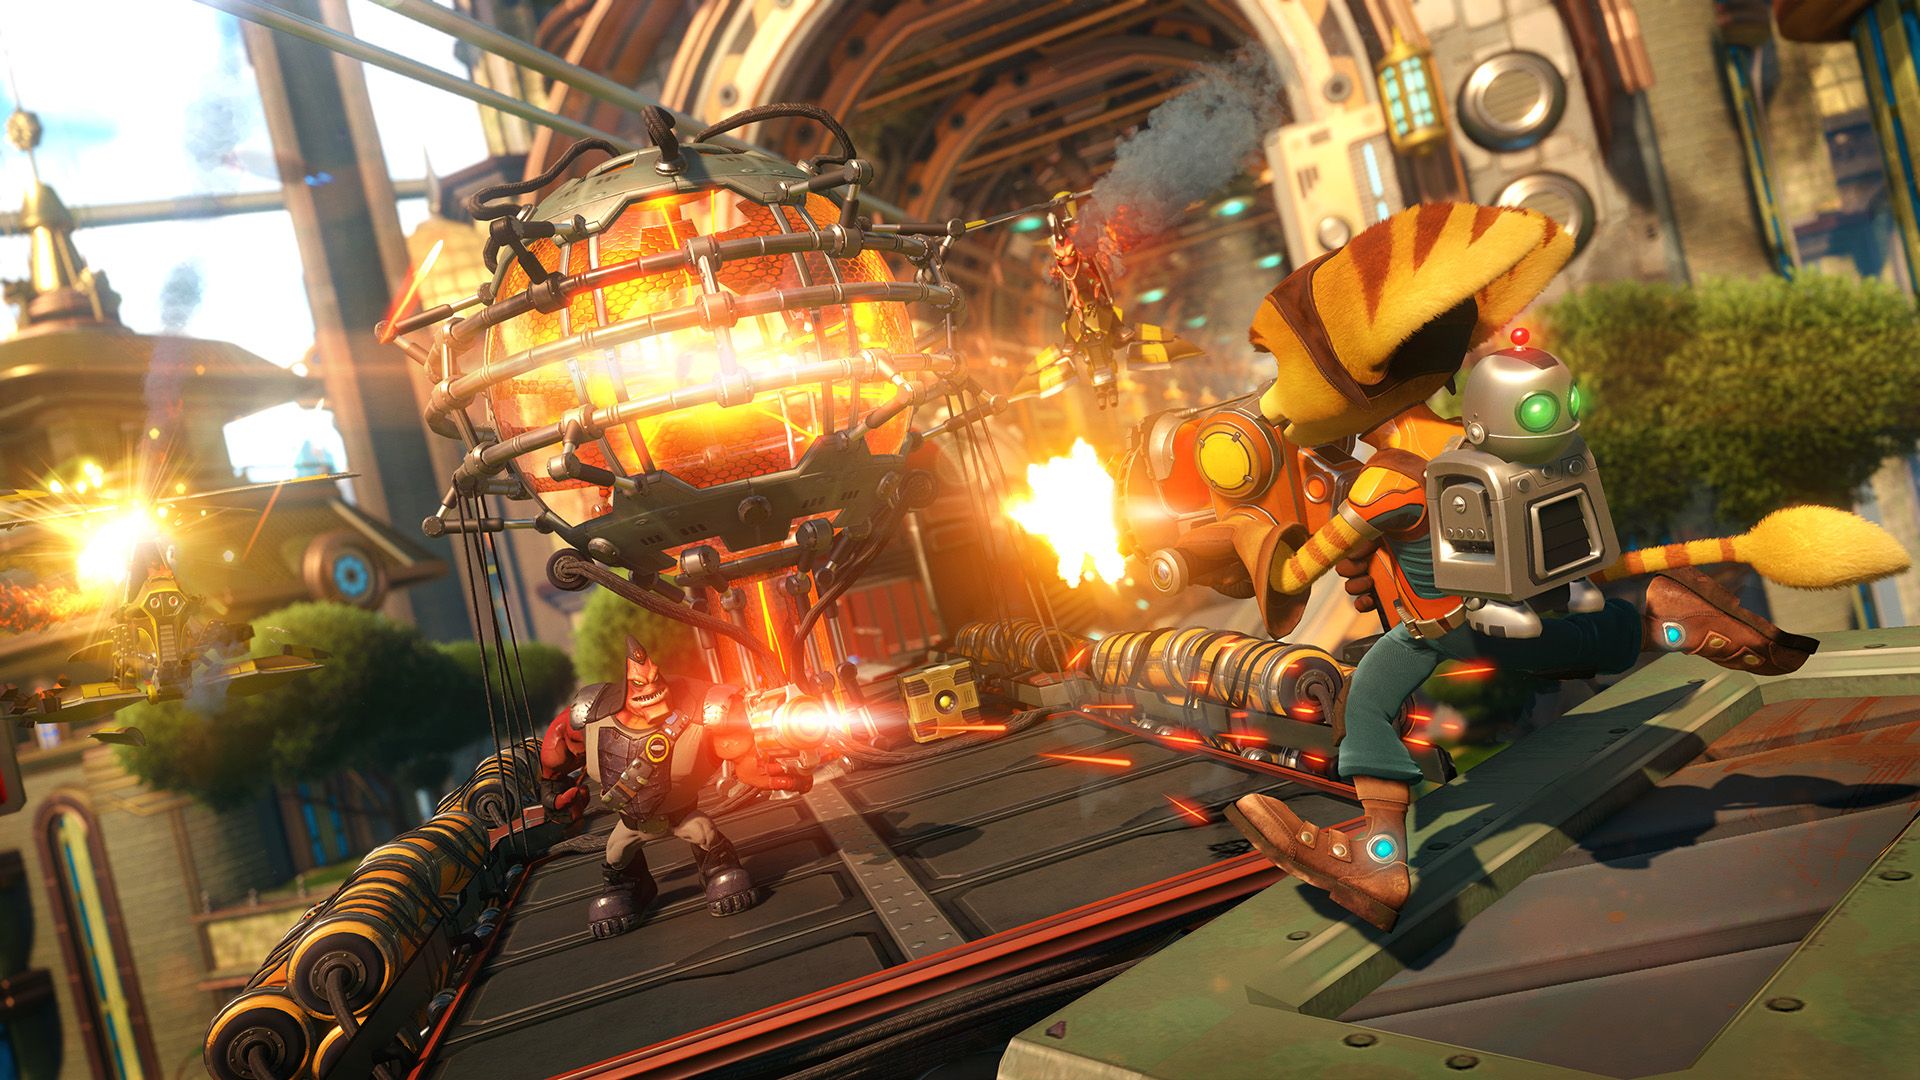 ratchet clank 2016 review image 2